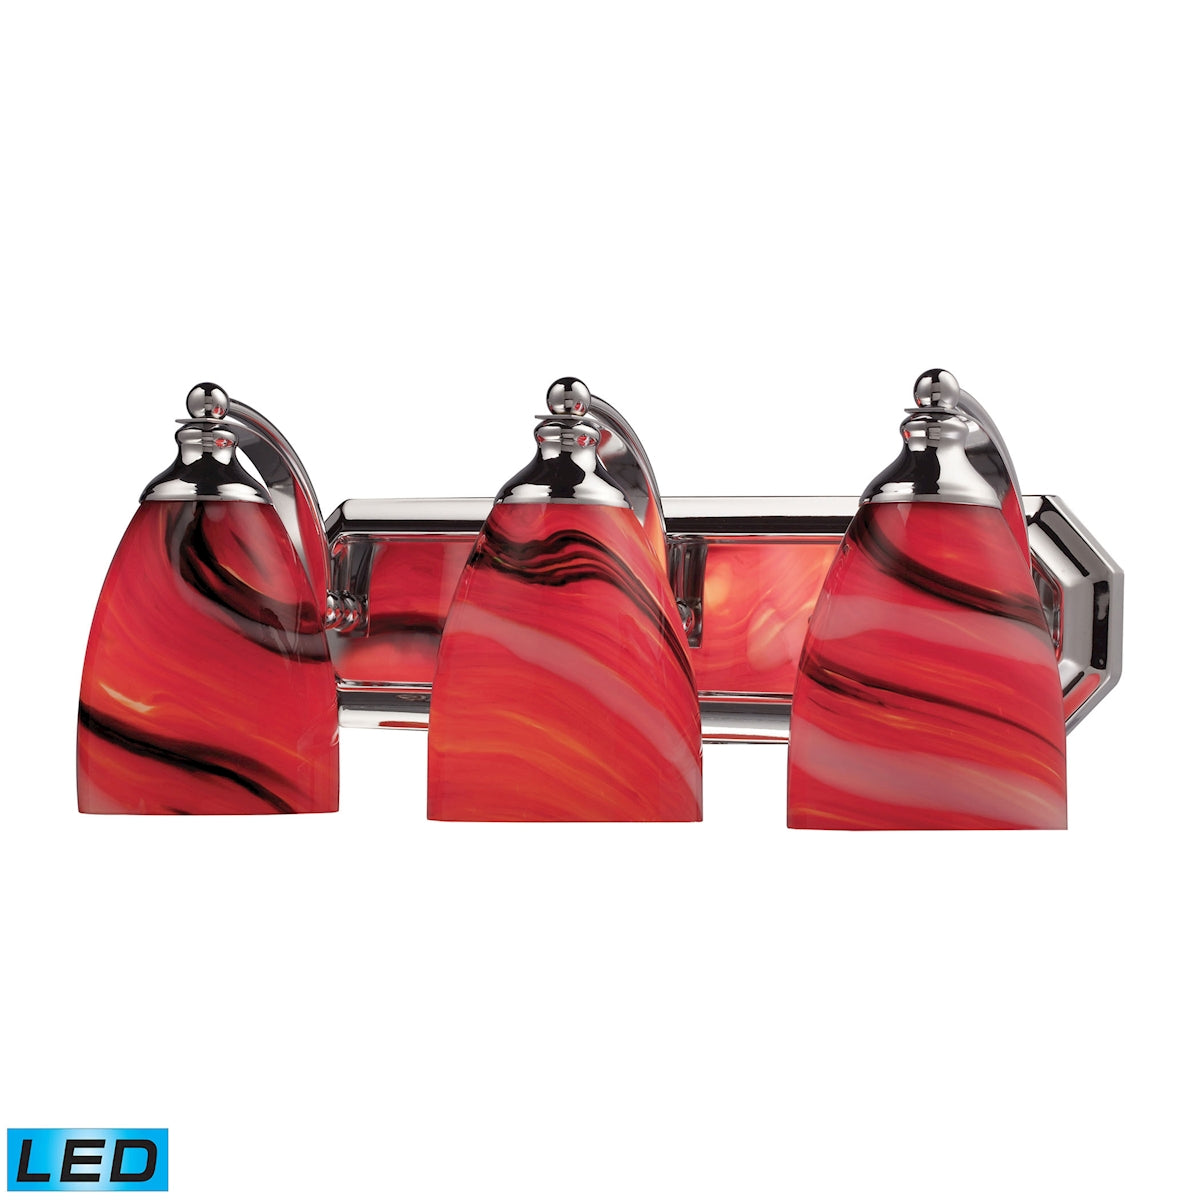 ELK Lighting 570-3C-CY-LED Mix and Match Vanity 3-Light Wall Lamp in Chrome with Canary Glass - Includes LED Bulbs